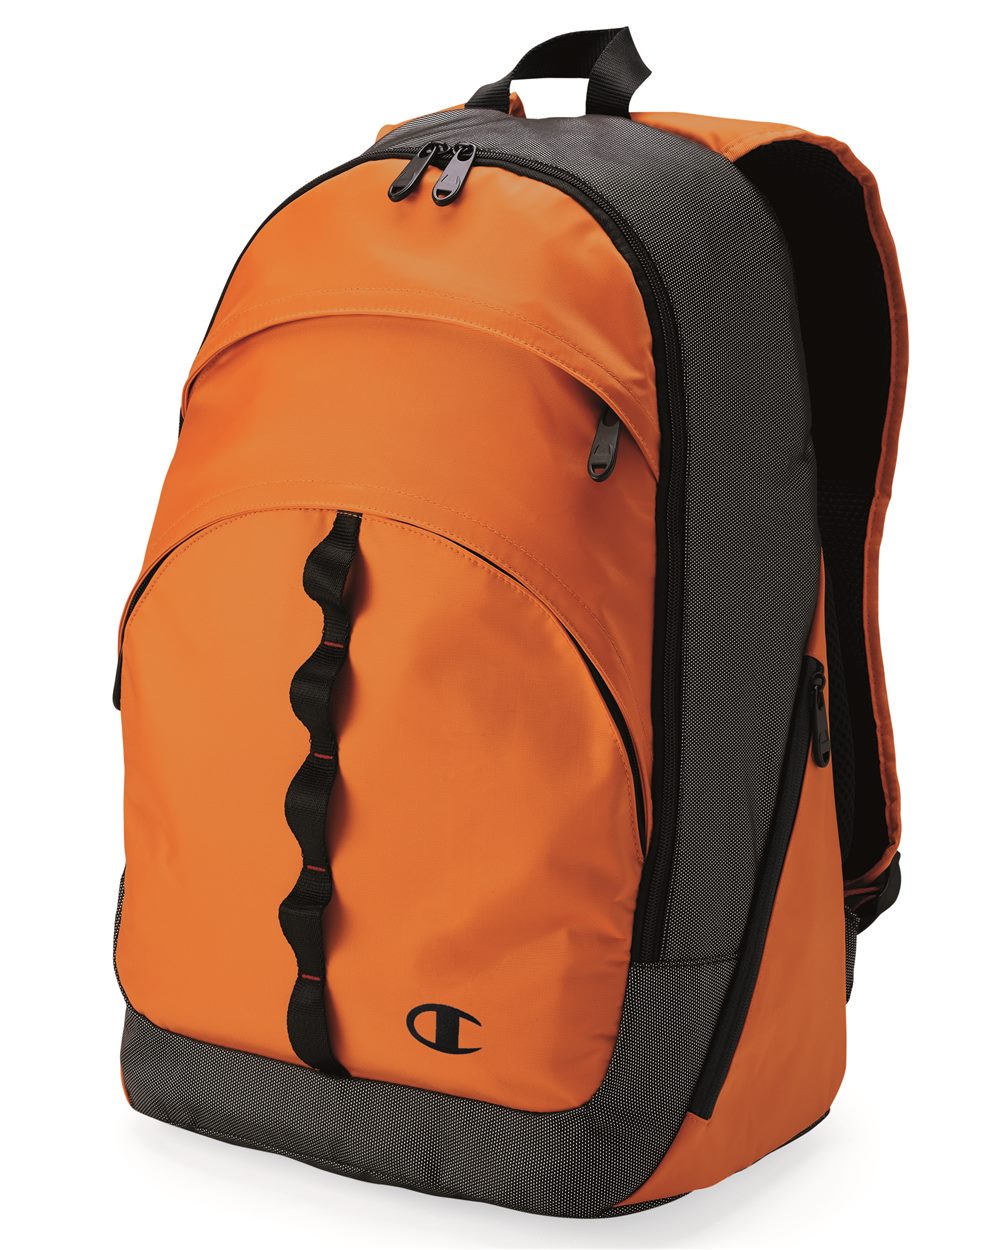 Champion CH104104 - Absolute 26L Backpack